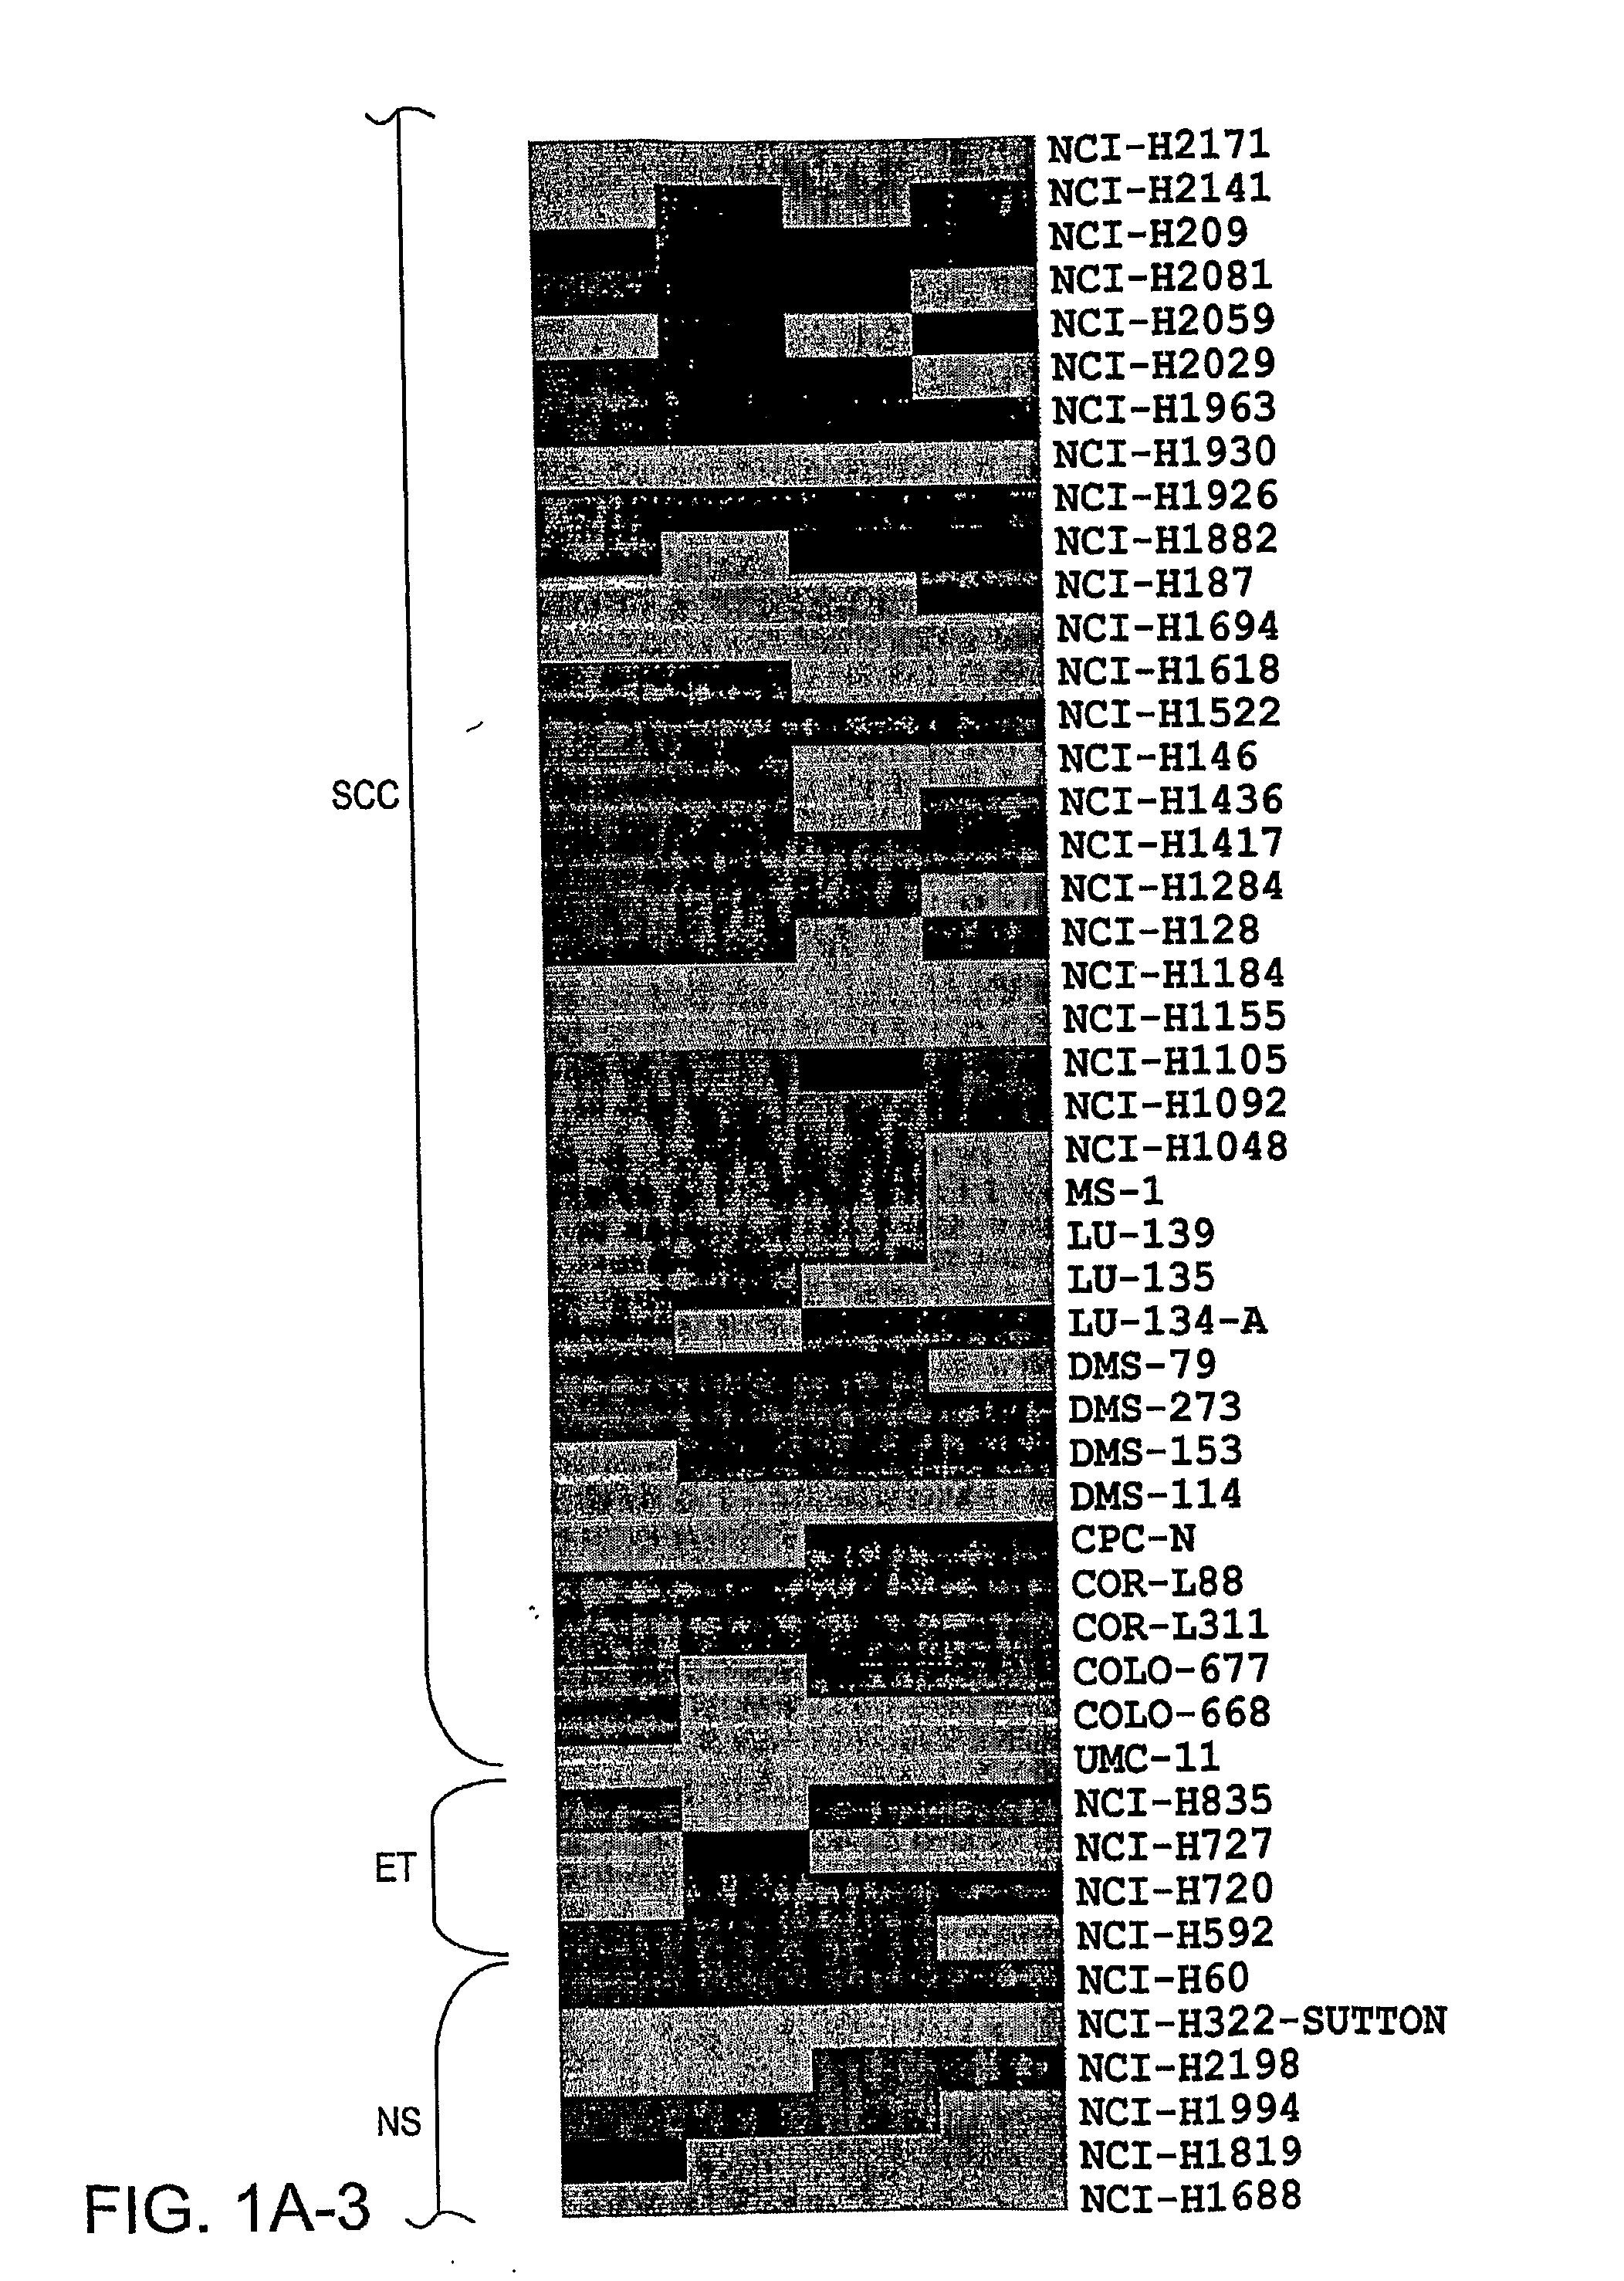 Compositions and methods for the treatment or prevention of chemoresistant neoplasia